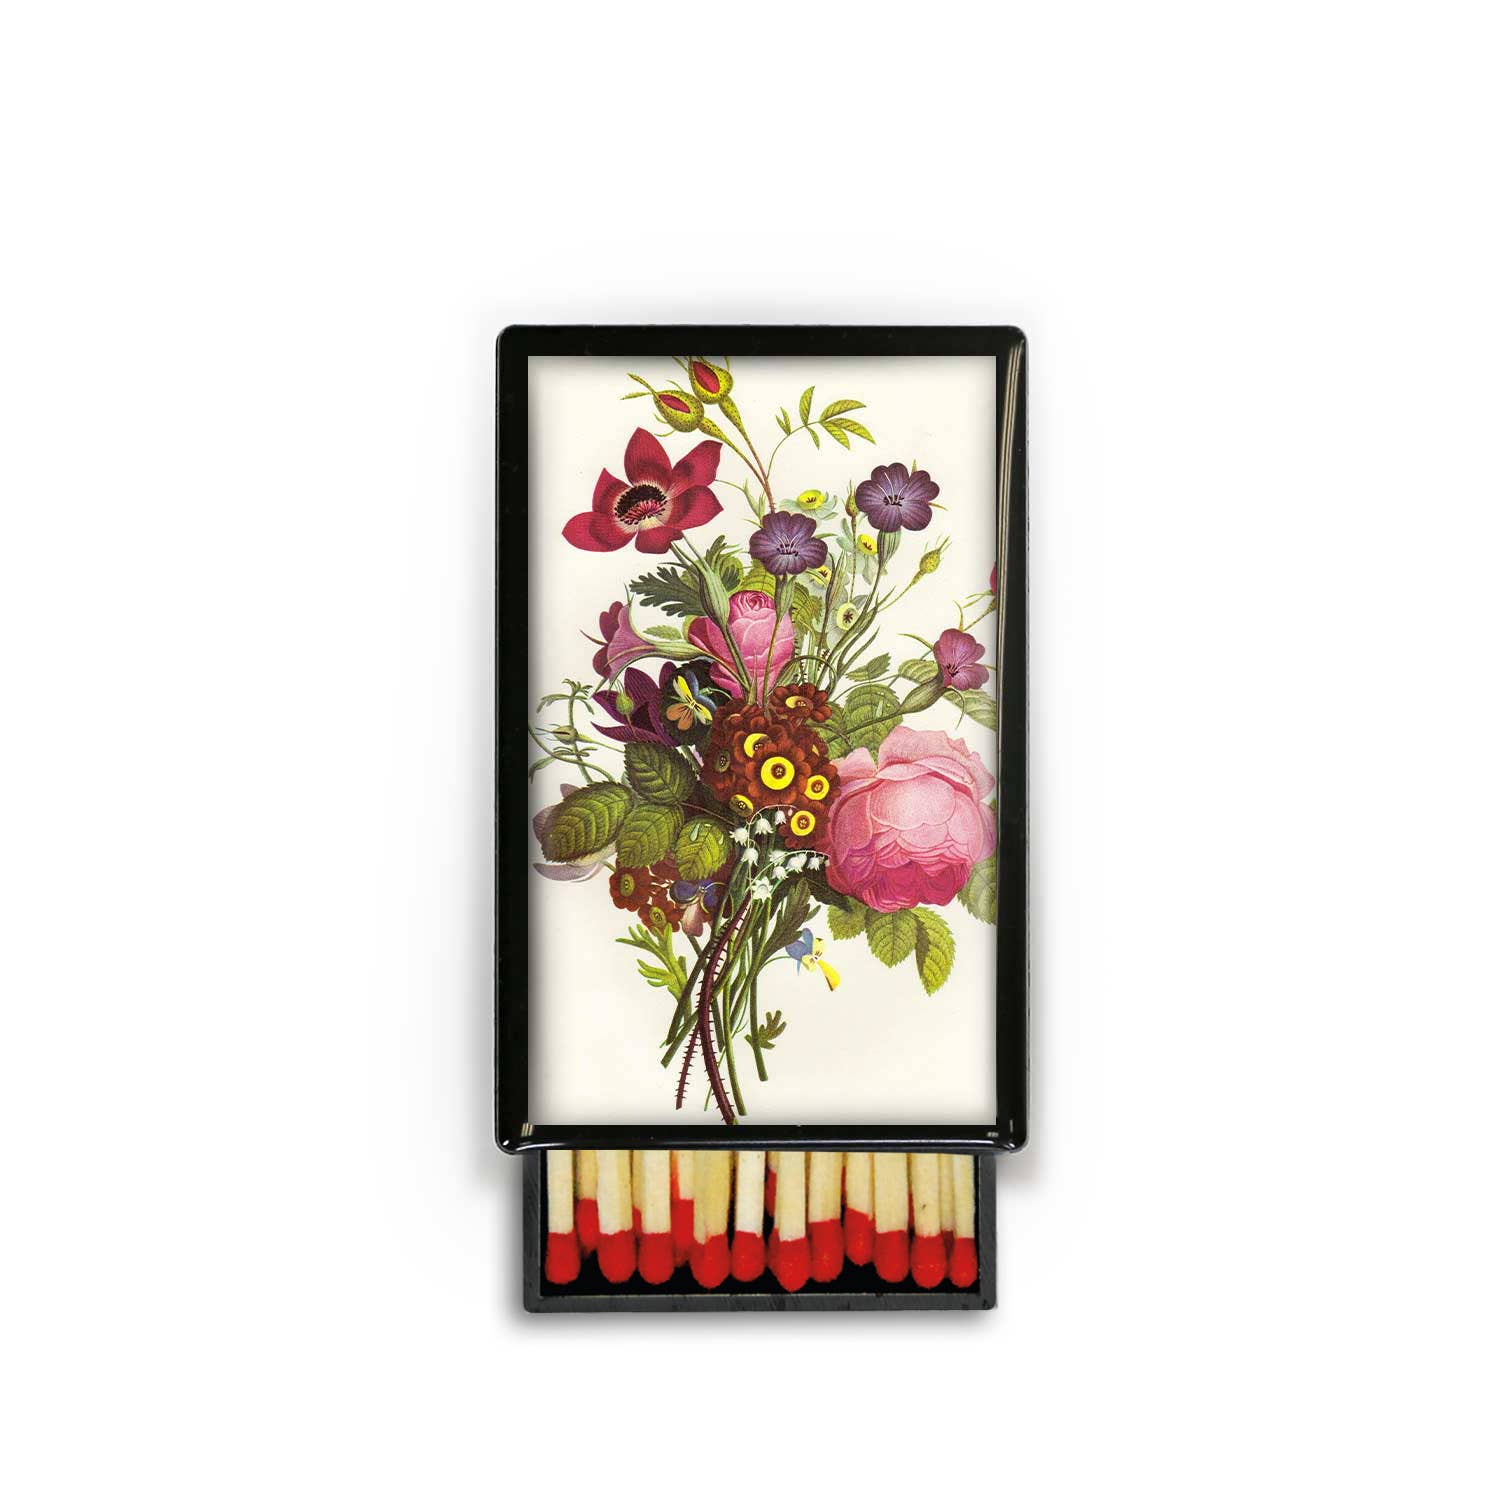 Lucy Lu Designs - Vintage Botanical Cabbage Rose Pansy Jonqui l Slide Box with Wooden Matches